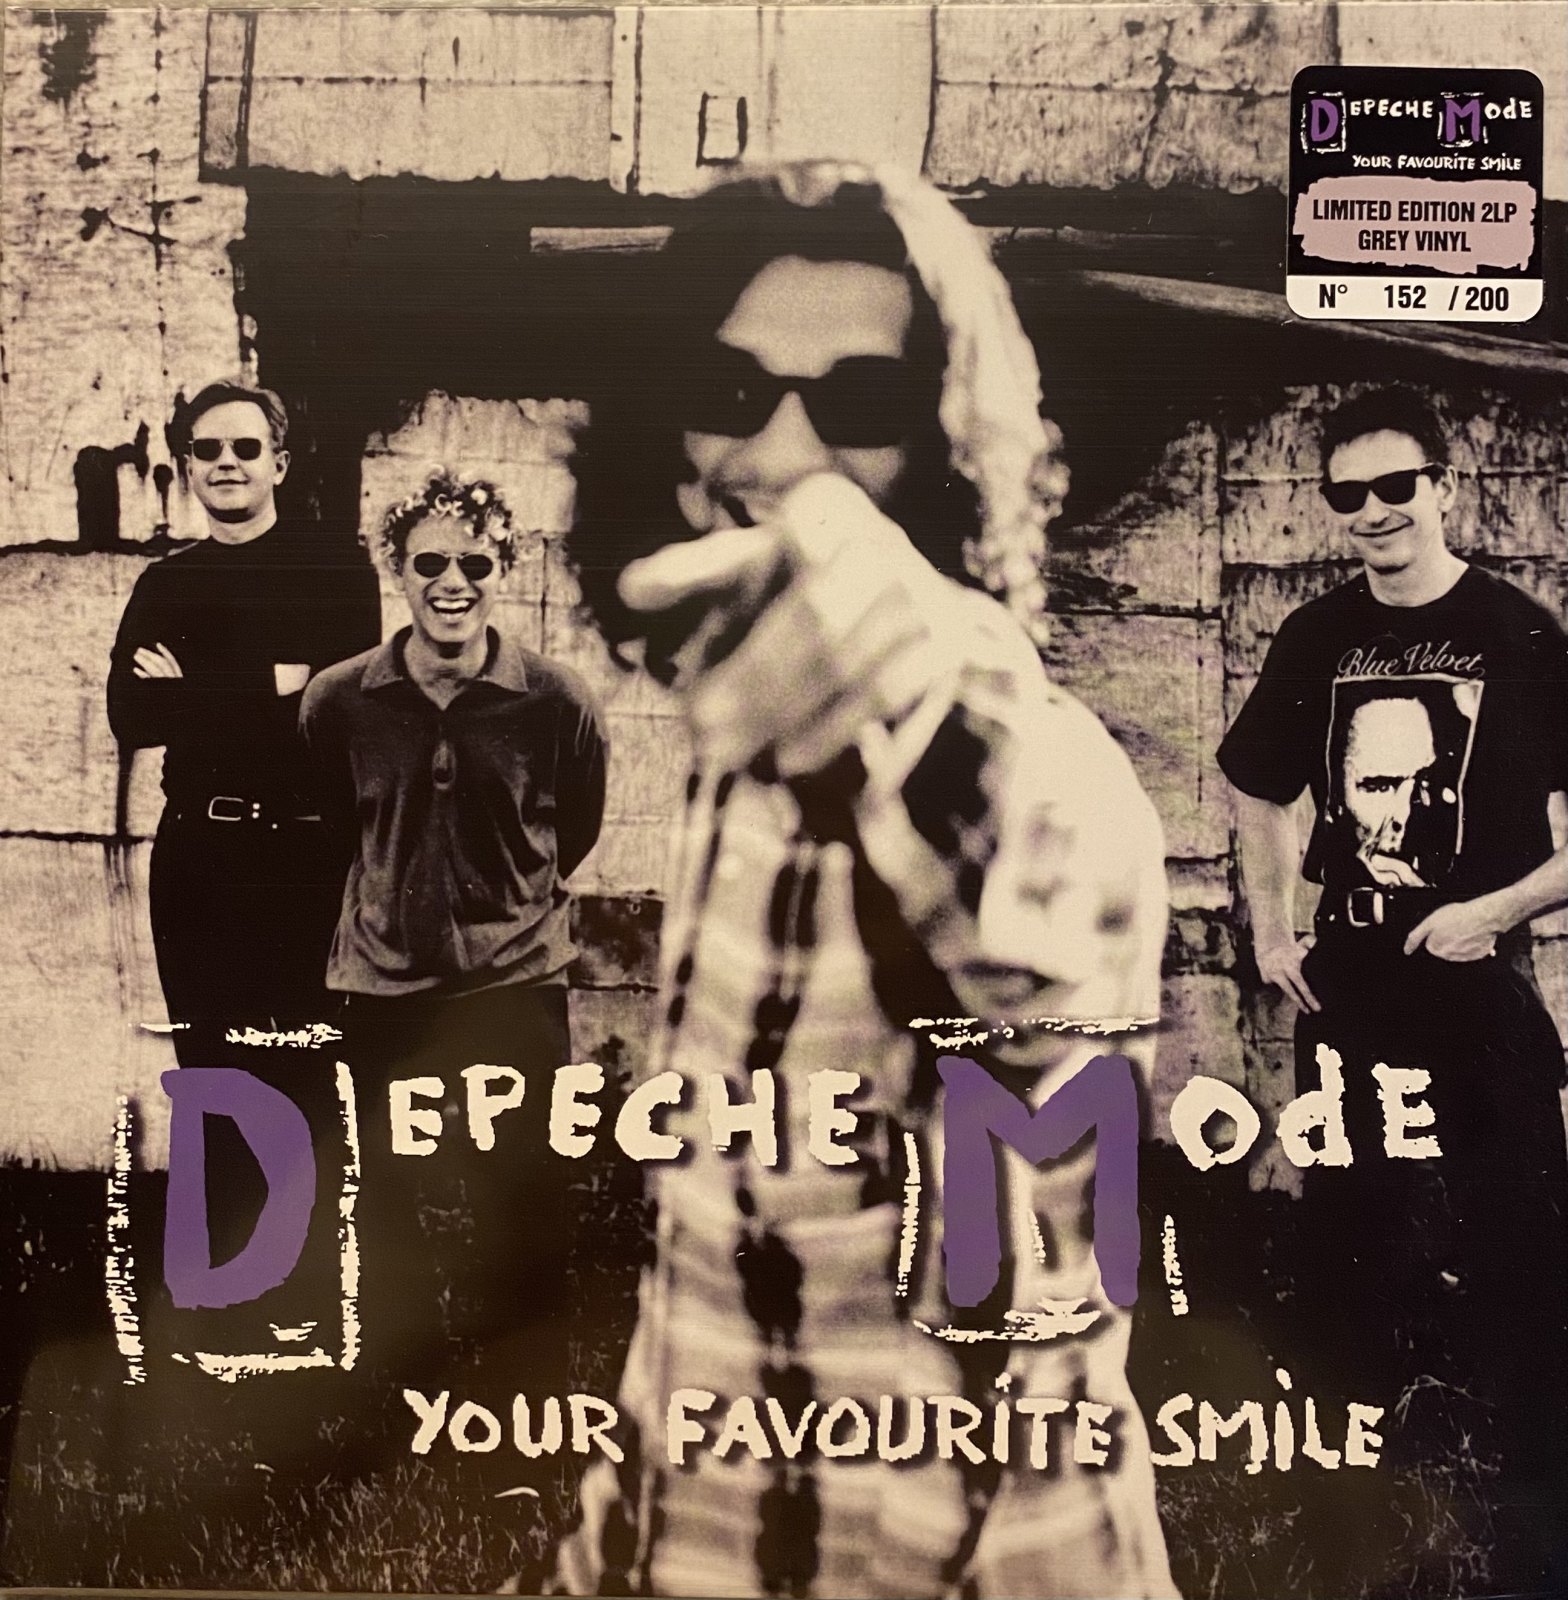 DEPECHE MODE - YOUR FAVOURITE SMILE: SAN FRANCISCO 1994 - NUMBERED & COLORED